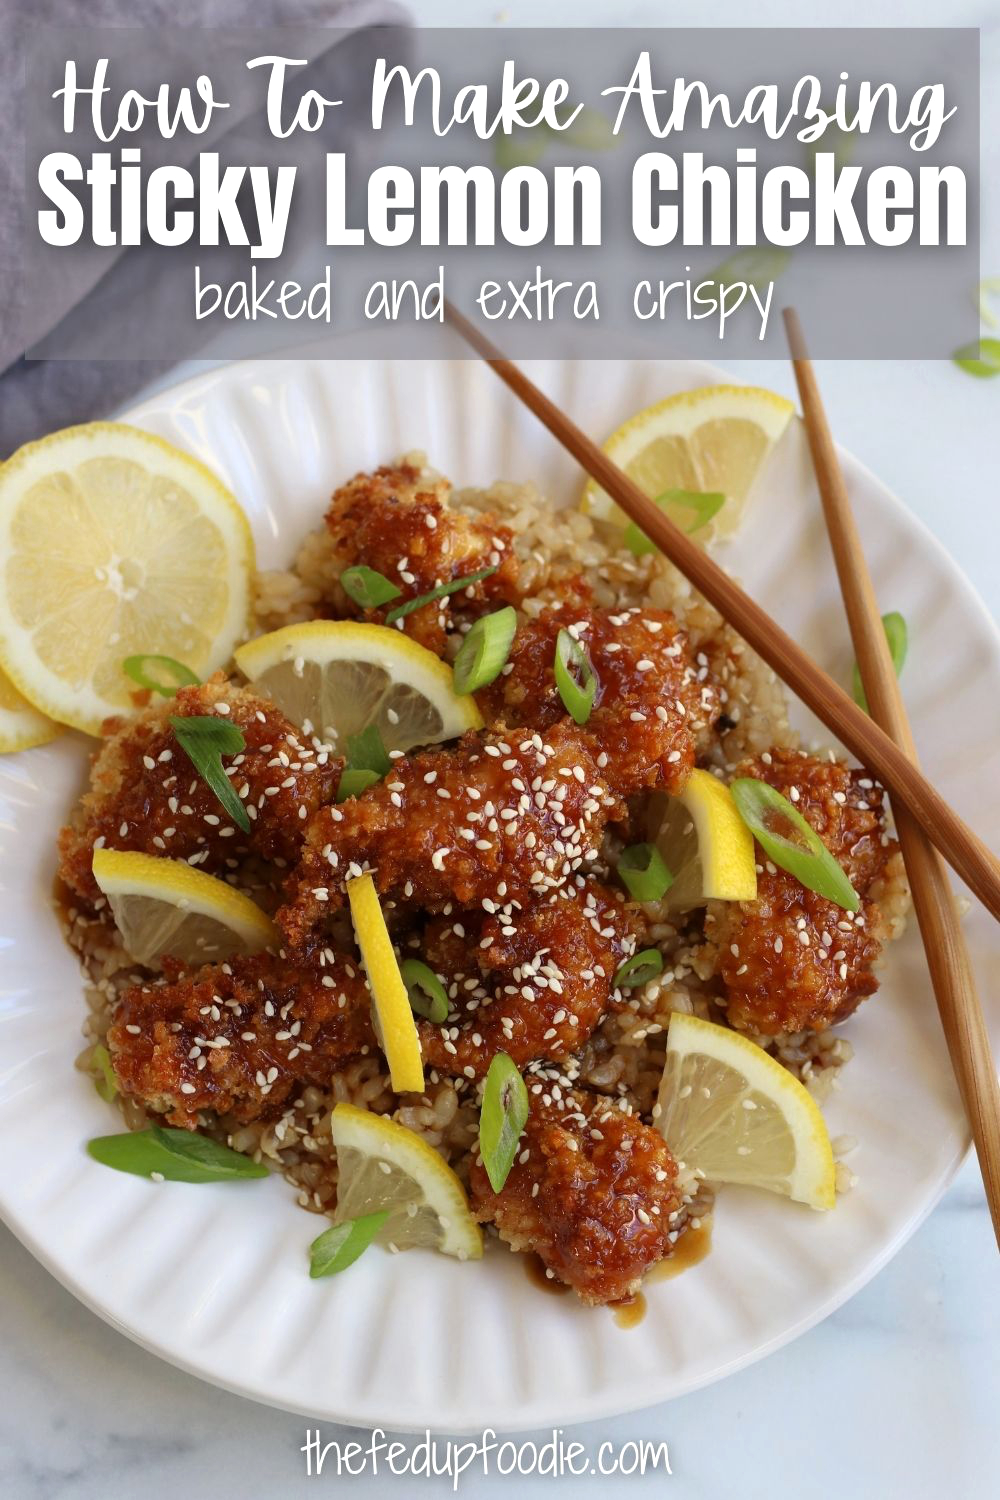 Sticky Lemon Chicken is packed with flavor and crunch while being healthier because it is baked. Very reminiscent of Chinese Lemon Chicken but without the added fat and calories. Easy to make and family approved. 
#StickyLemonChicken #ChineseLemonChickenRecipeBaked #BakedStickyChicken #AsianLemonChicken #AsianLemonSauce #AsianLemonChickenSauce #OrientalChickenRecipes 